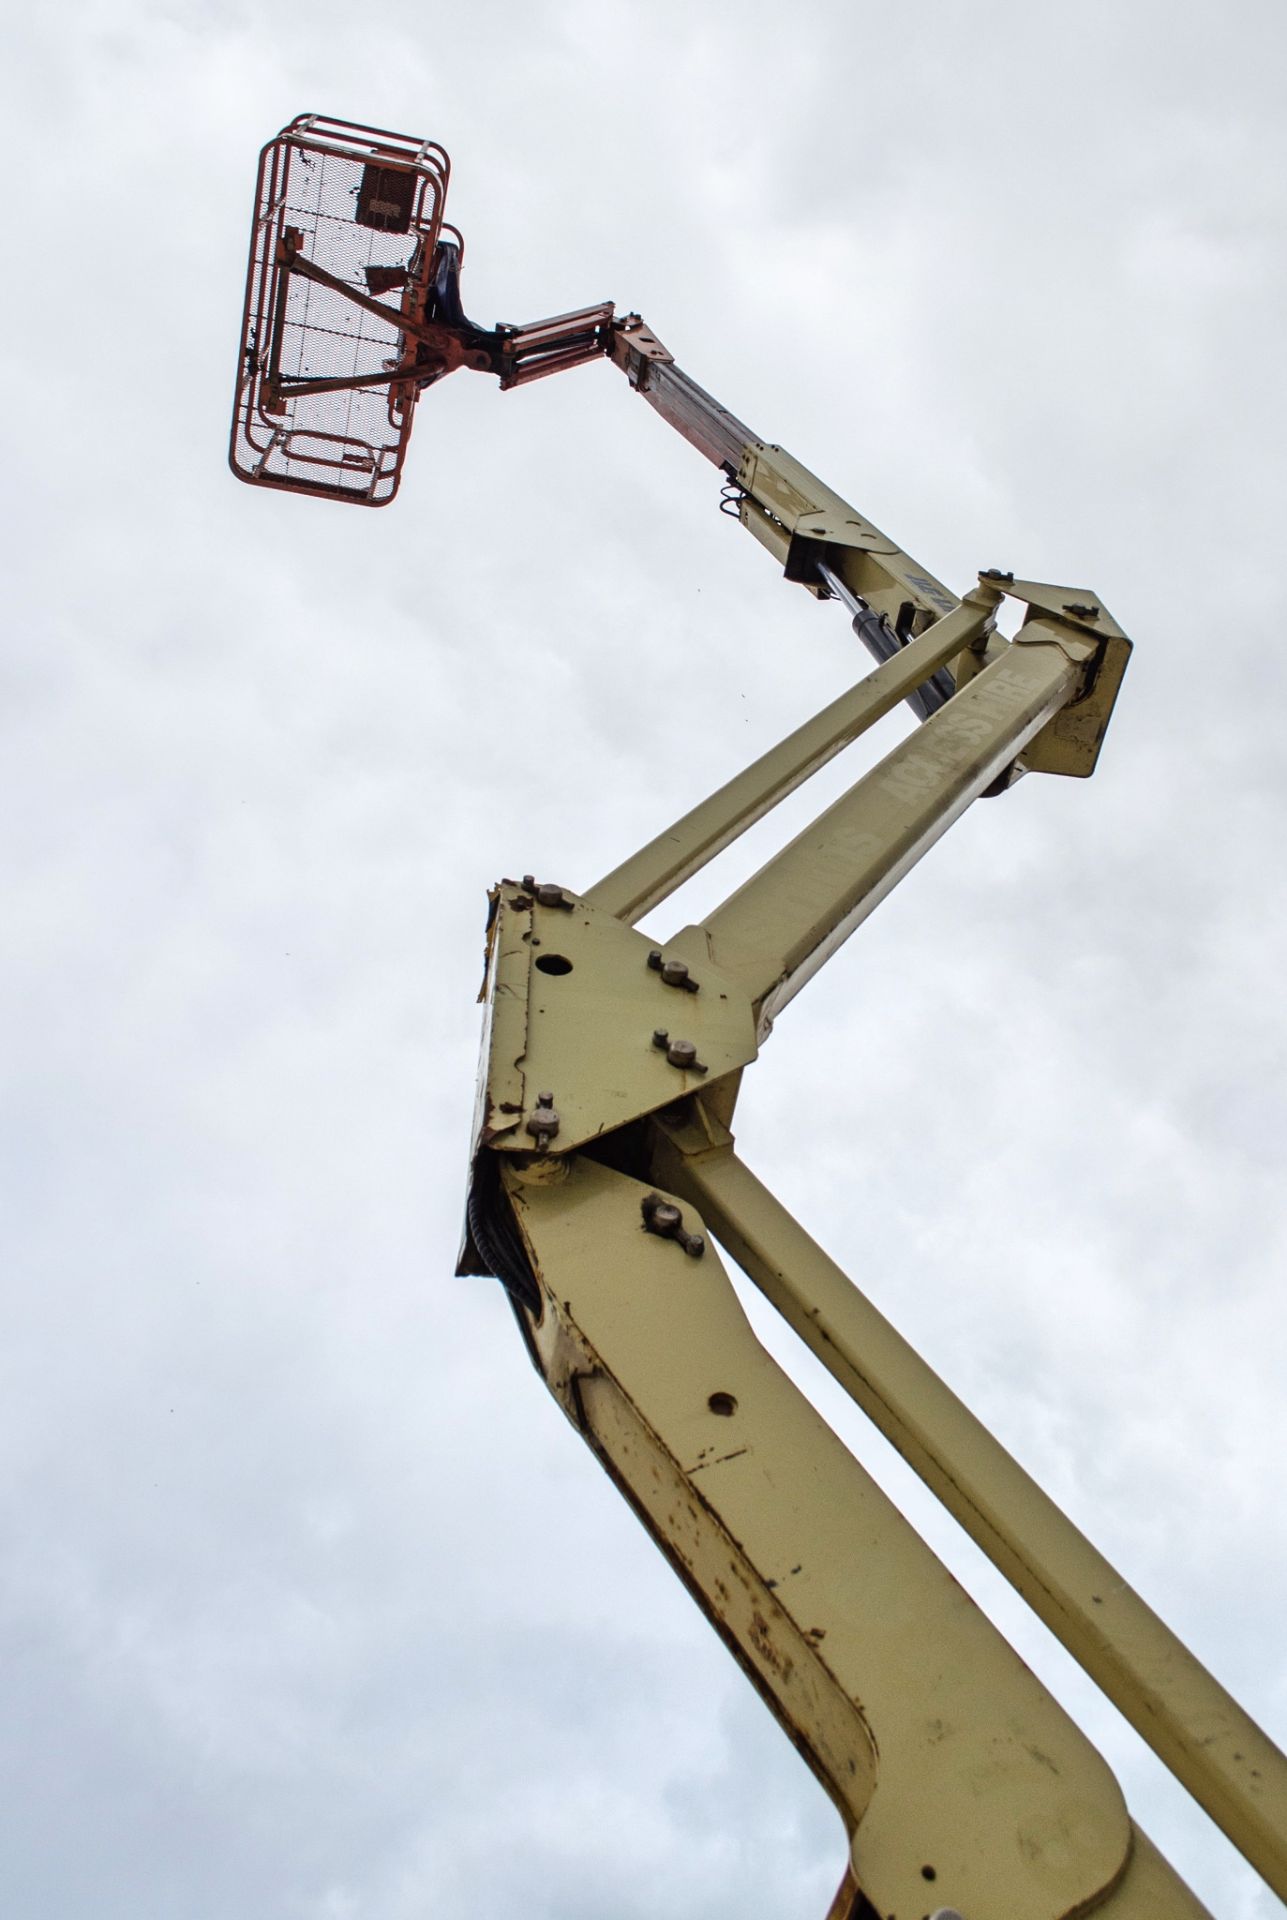 JLG 450 AJ diesel articulated boom access platform Year: 2007 S/N: 1300002963 Recorded Hours: 3467 - Image 12 of 16